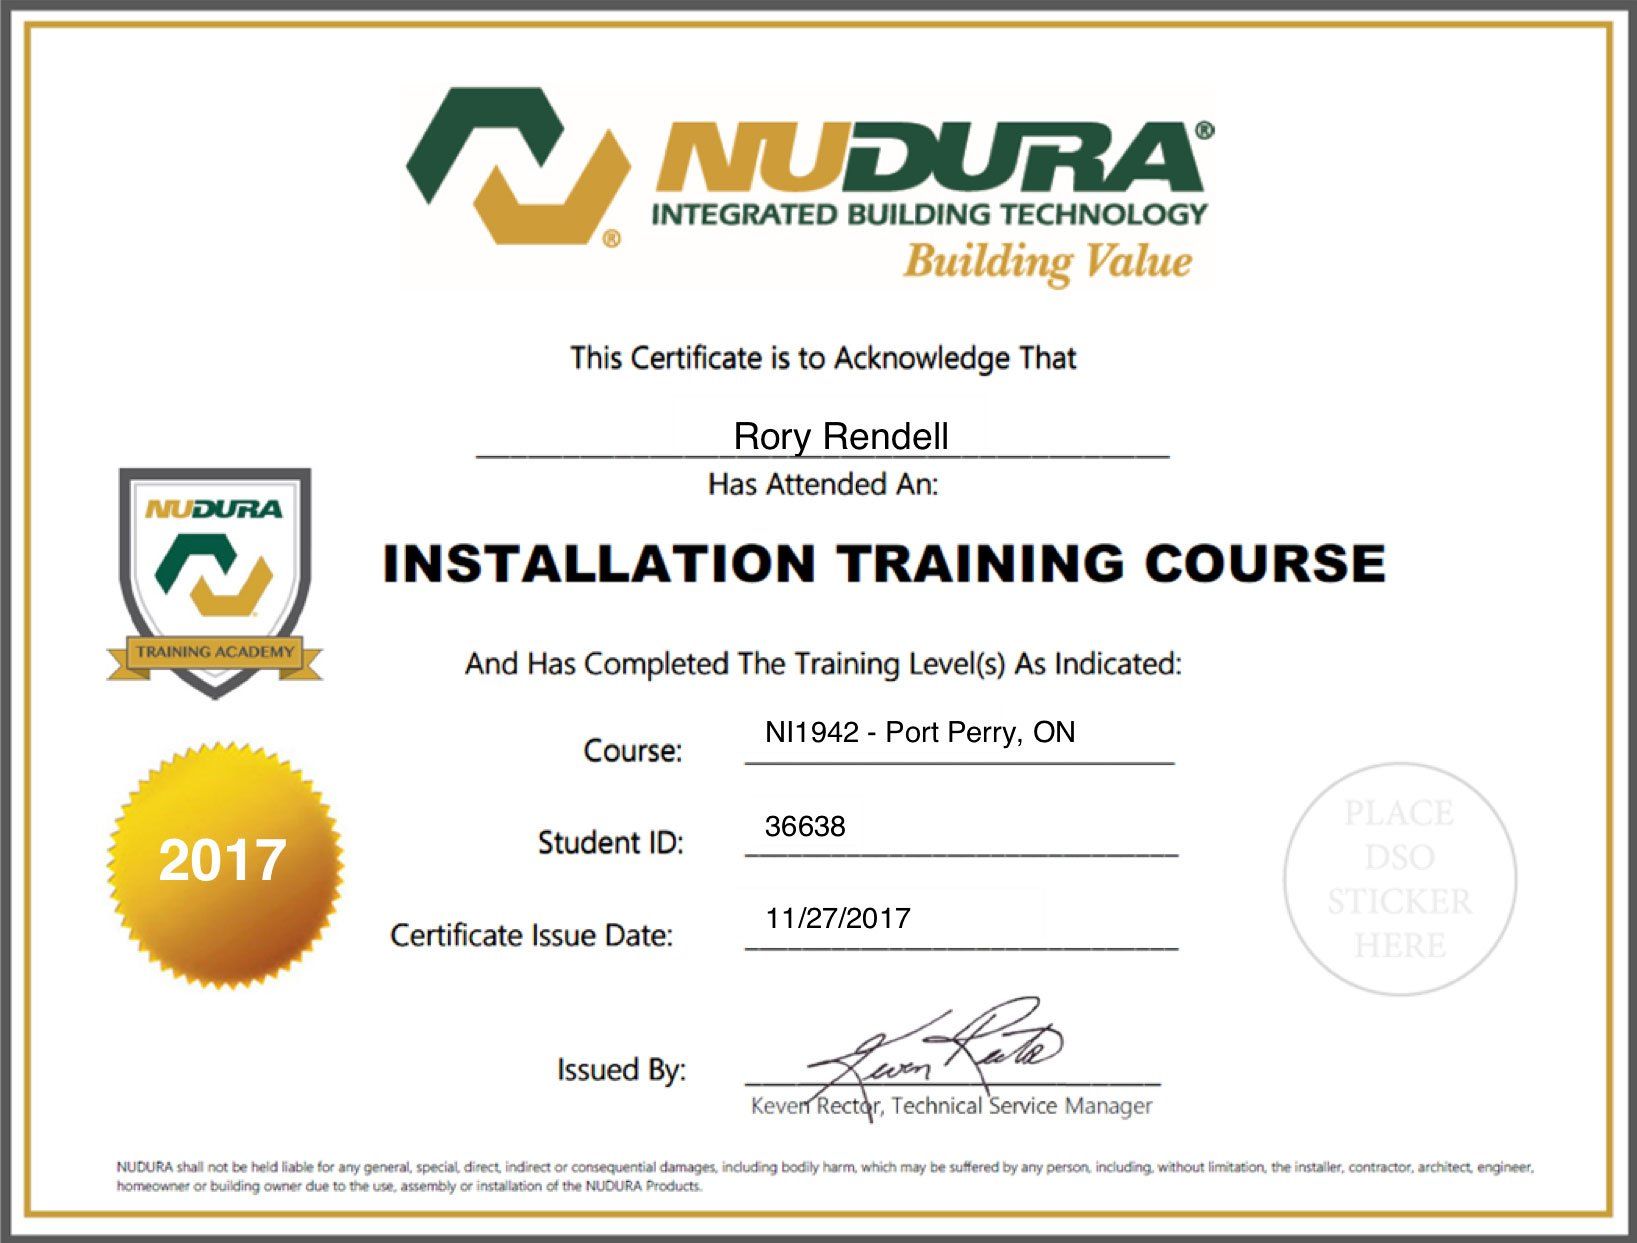 A certificate for a nadura installation training course